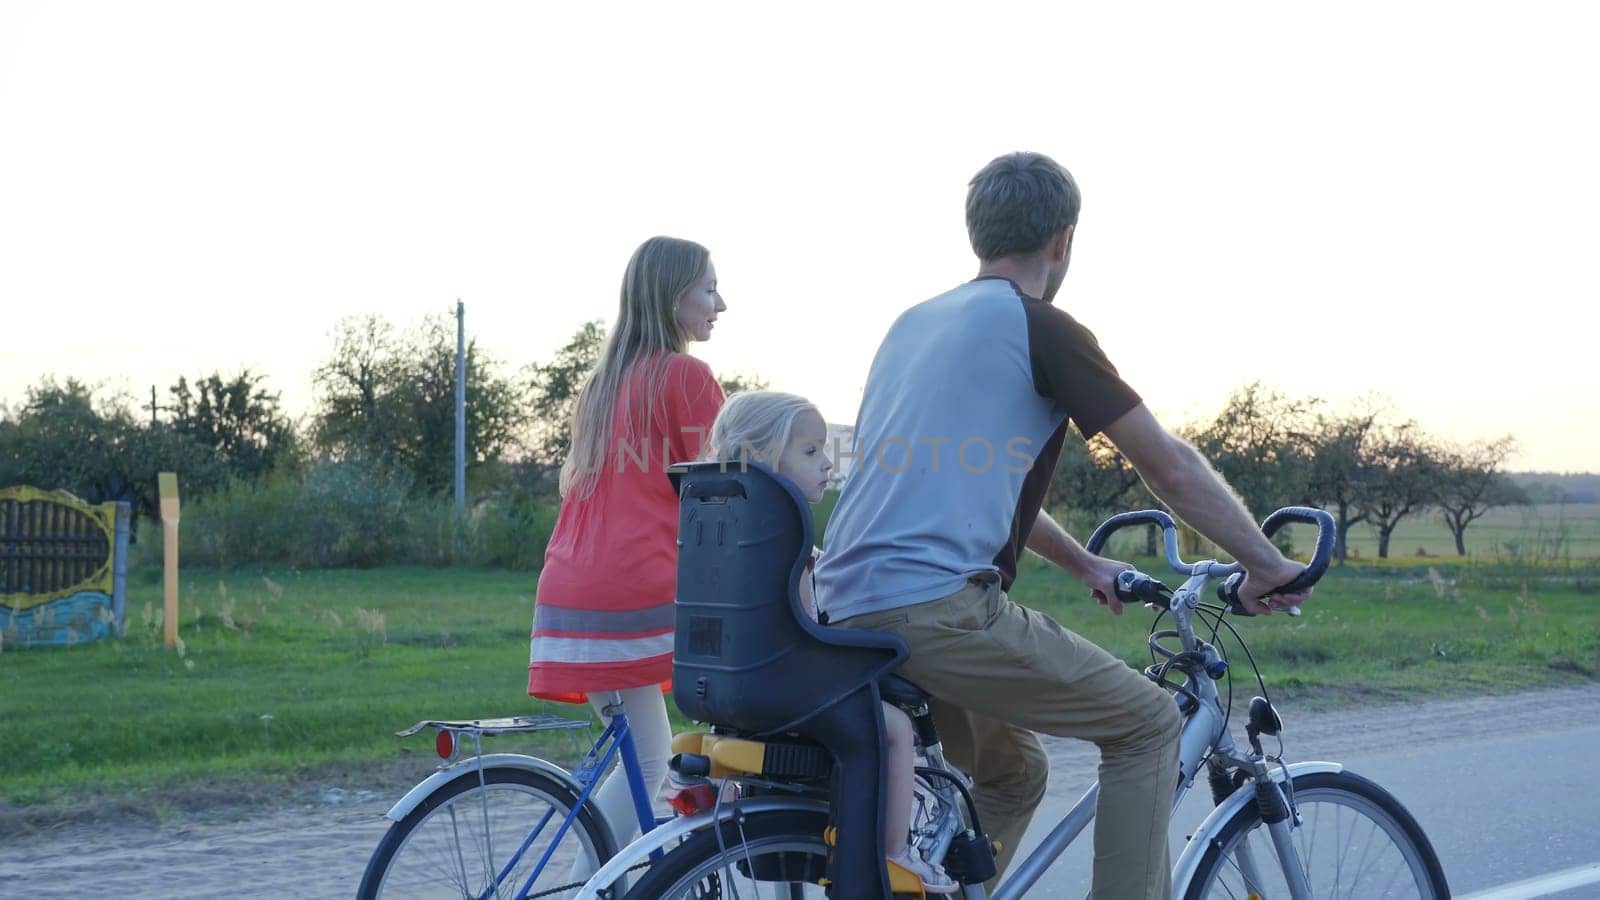 Young couple on a bike with their little daughter at sunset. by DovidPro